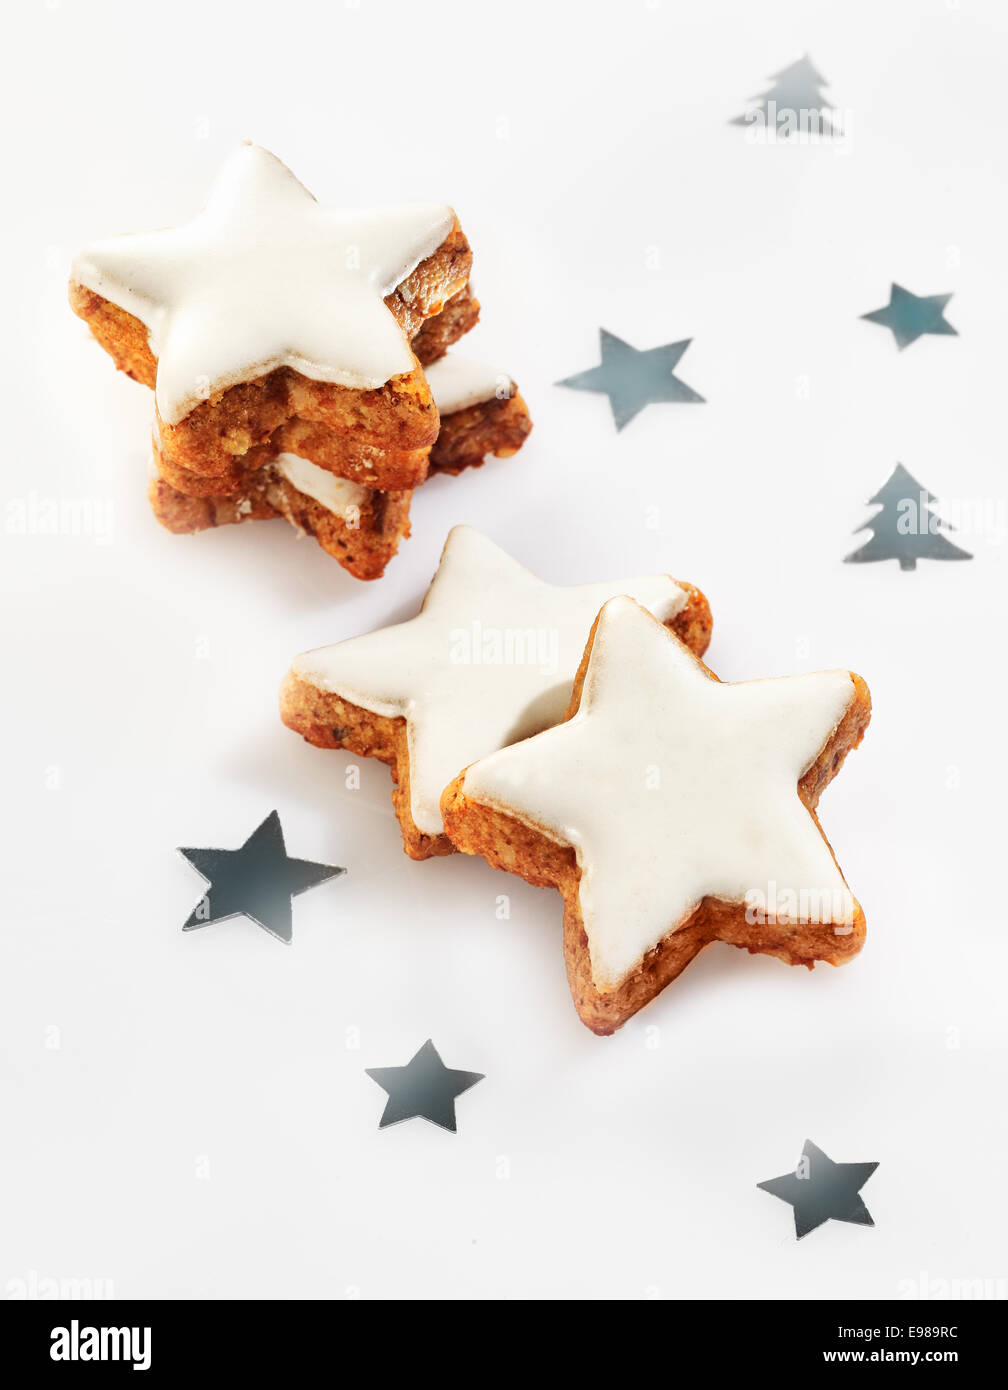 Delicious fresh crunchy Christmas star cookies with decorative white icing and scattered silver stars on a white background Stock Photo